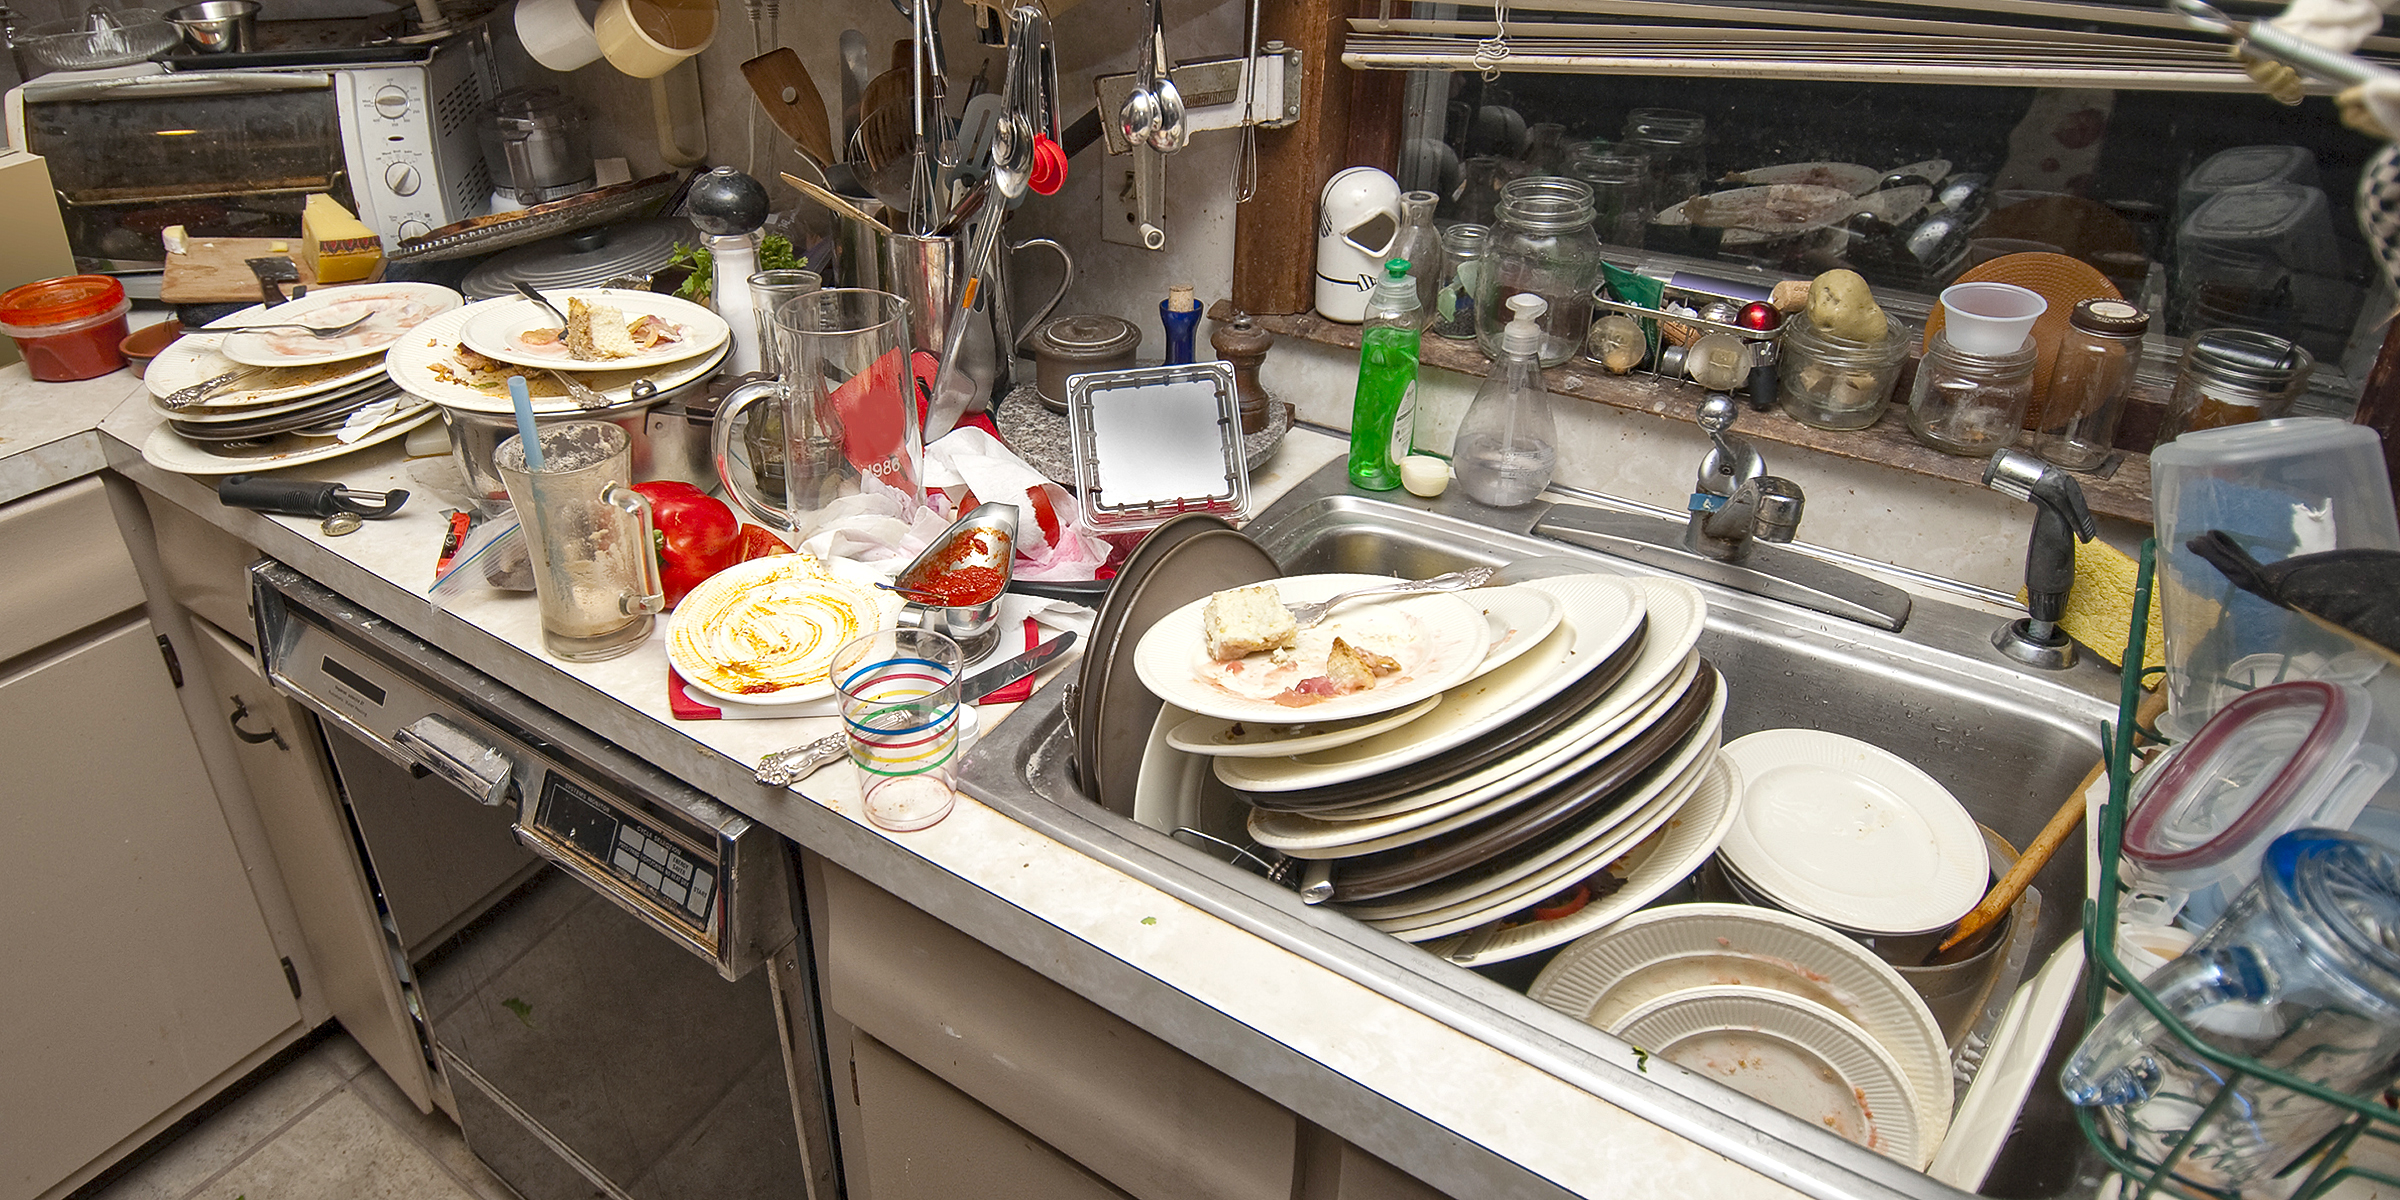 A sink loaded with dirty dishes | Source: Shutterstock